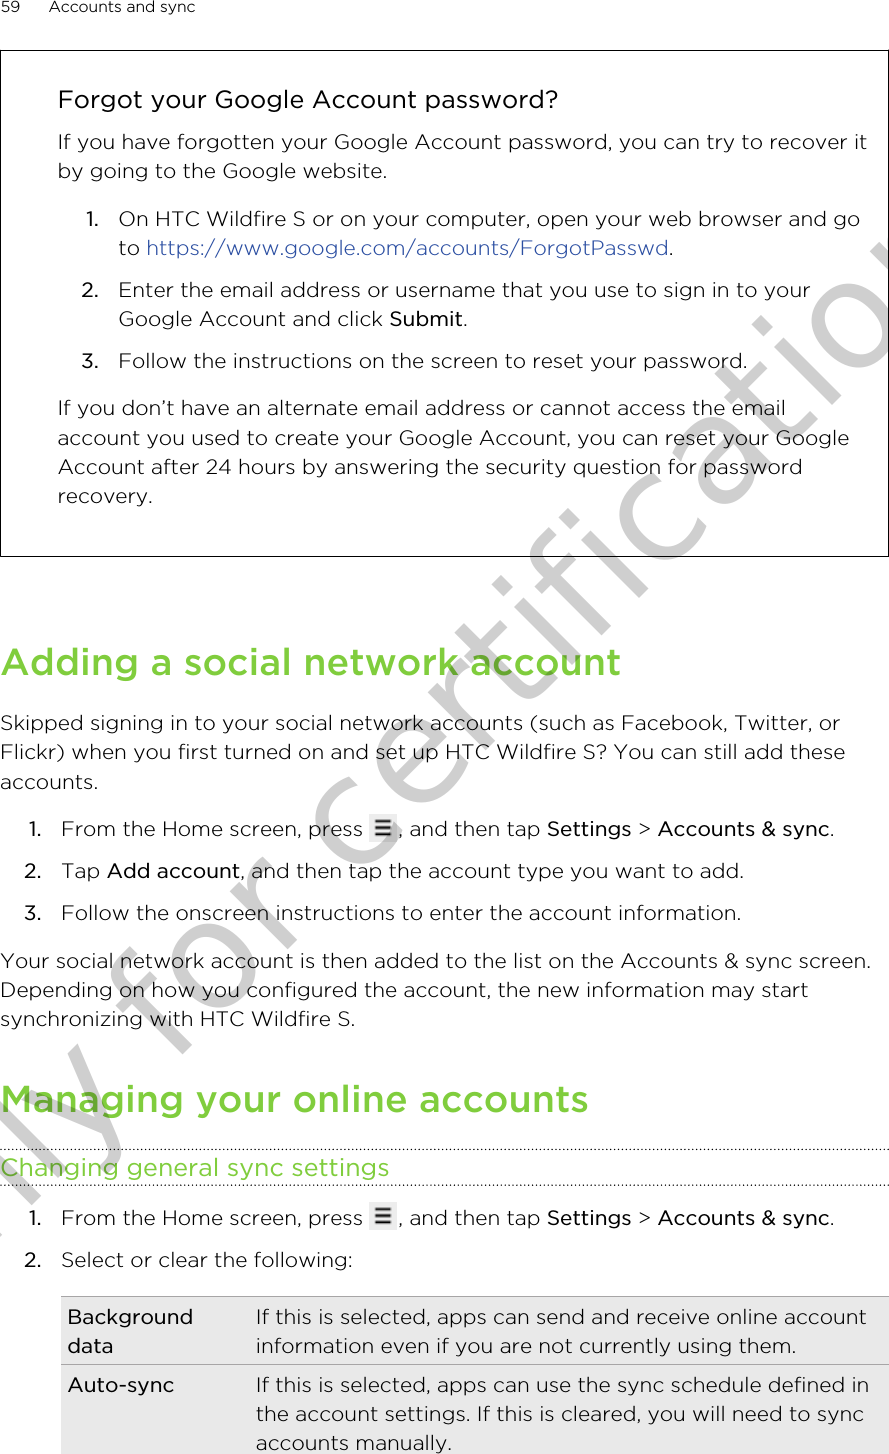 Forgot your Google Account password?If you have forgotten your Google Account password, you can try to recover itby going to the Google website.1. On HTC Wildfire S or on your computer, open your web browser and goto https://www.google.com/accounts/ForgotPasswd.2. Enter the email address or username that you use to sign in to yourGoogle Account and click Submit.3. Follow the instructions on the screen to reset your password.If you don’t have an alternate email address or cannot access the emailaccount you used to create your Google Account, you can reset your GoogleAccount after 24 hours by answering the security question for passwordrecovery.Adding a social network accountSkipped signing in to your social network accounts (such as Facebook, Twitter, orFlickr) when you first turned on and set up HTC Wildfire S? You can still add theseaccounts.1. From the Home screen, press  , and then tap Settings &gt; Accounts &amp; sync.2. Tap Add account, and then tap the account type you want to add.3. Follow the onscreen instructions to enter the account information.Your social network account is then added to the list on the Accounts &amp; sync screen.Depending on how you configured the account, the new information may startsynchronizing with HTC Wildfire S.Managing your online accountsChanging general sync settings1. From the Home screen, press  , and then tap Settings &gt; Accounts &amp; sync.2. Select or clear the following:BackgrounddataIf this is selected, apps can send and receive online accountinformation even if you are not currently using them.Auto-sync If this is selected, apps can use the sync schedule defined inthe account settings. If this is cleared, you will need to syncaccounts manually.59 Accounts and syncOnly for certification